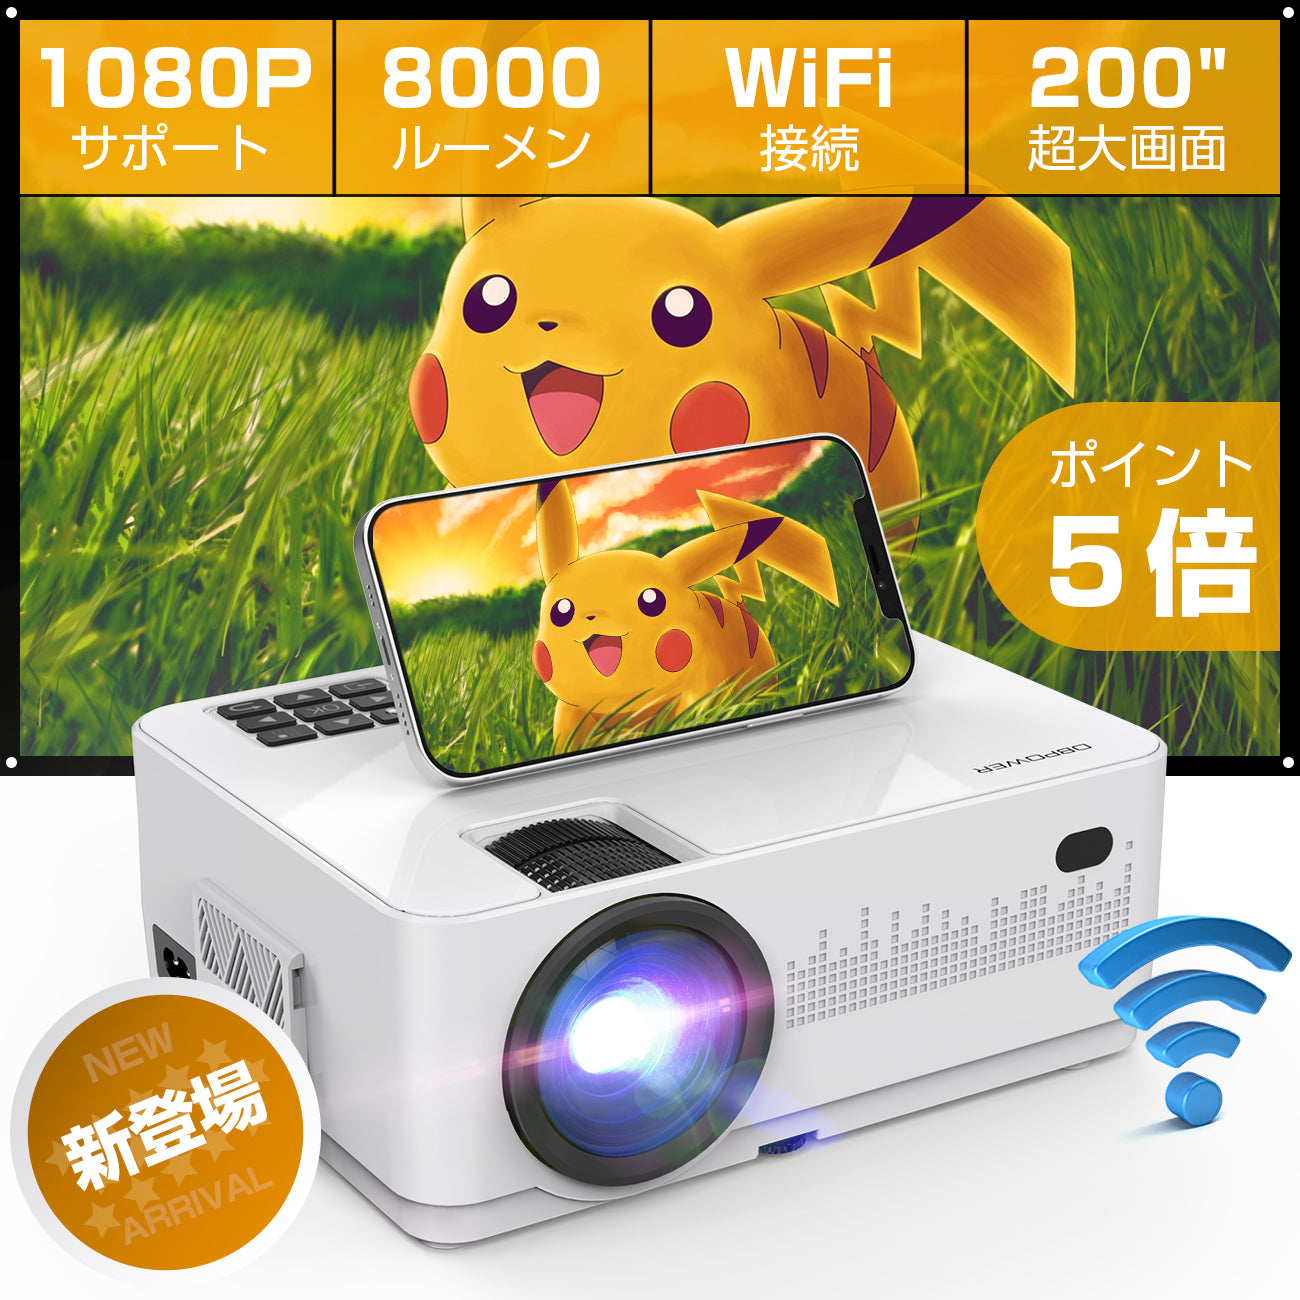 DBPOWER WiFi プロジェクター 8000lm リアル1920×1080P解像度 WiFi接続可 iOS Android両方対応 交 - 5